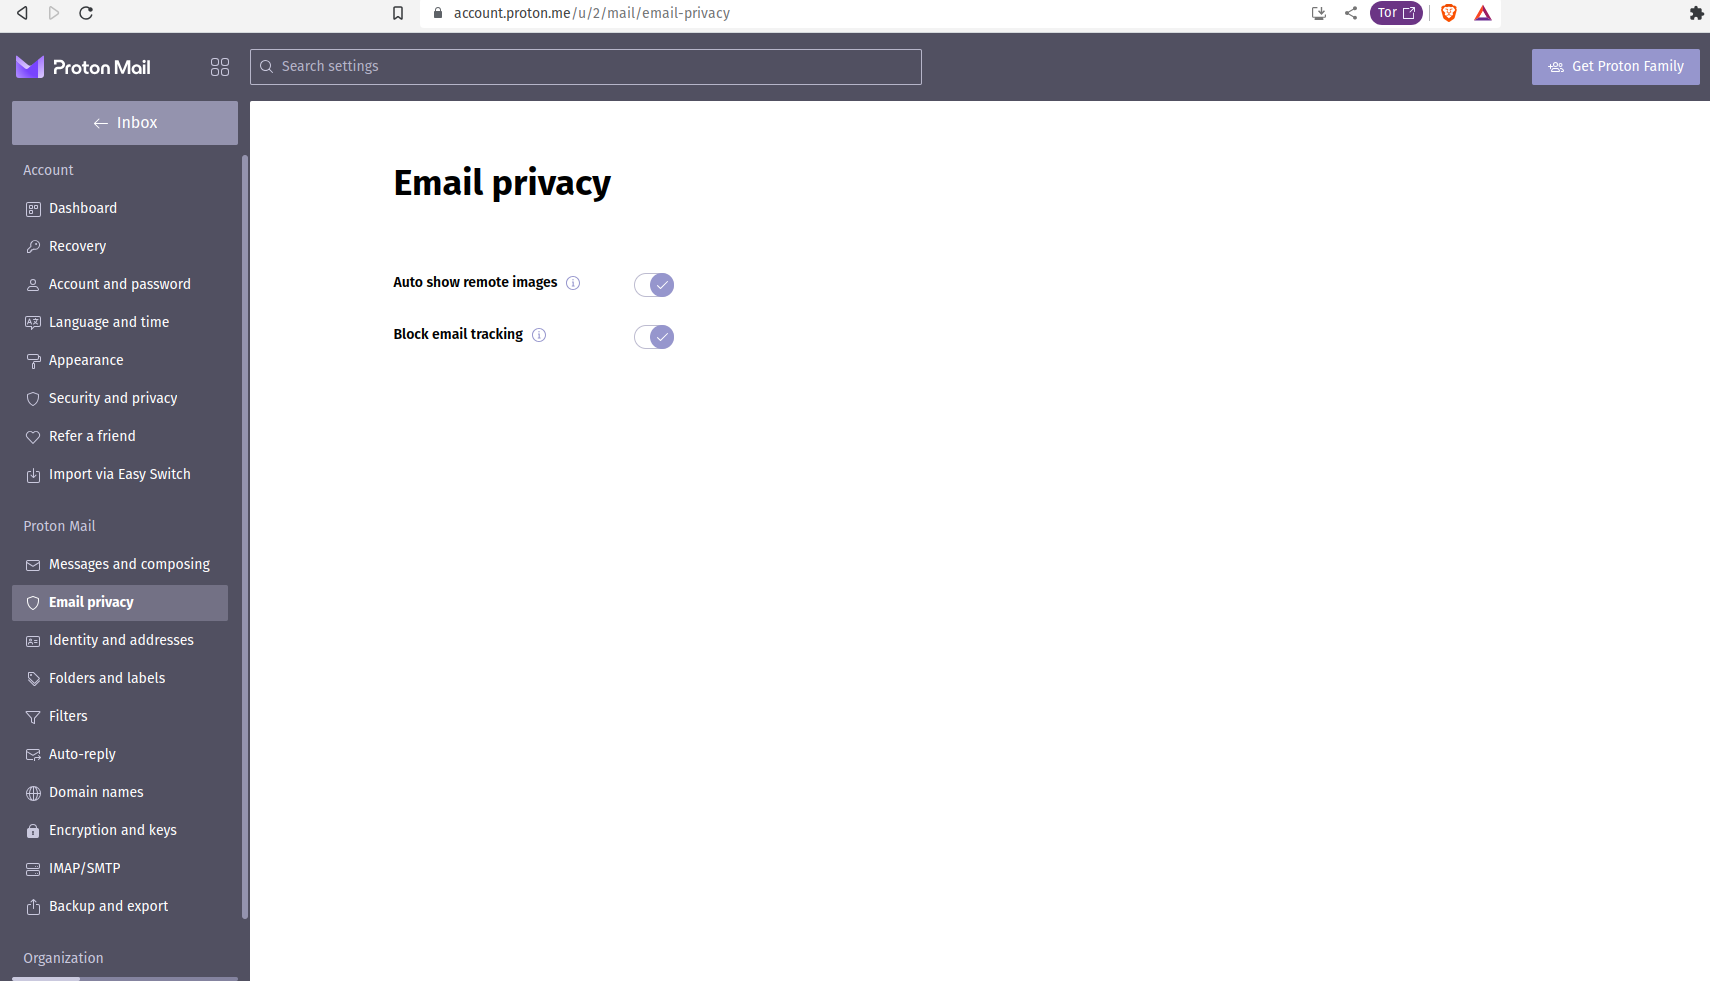 Proton Mail new privacy feature